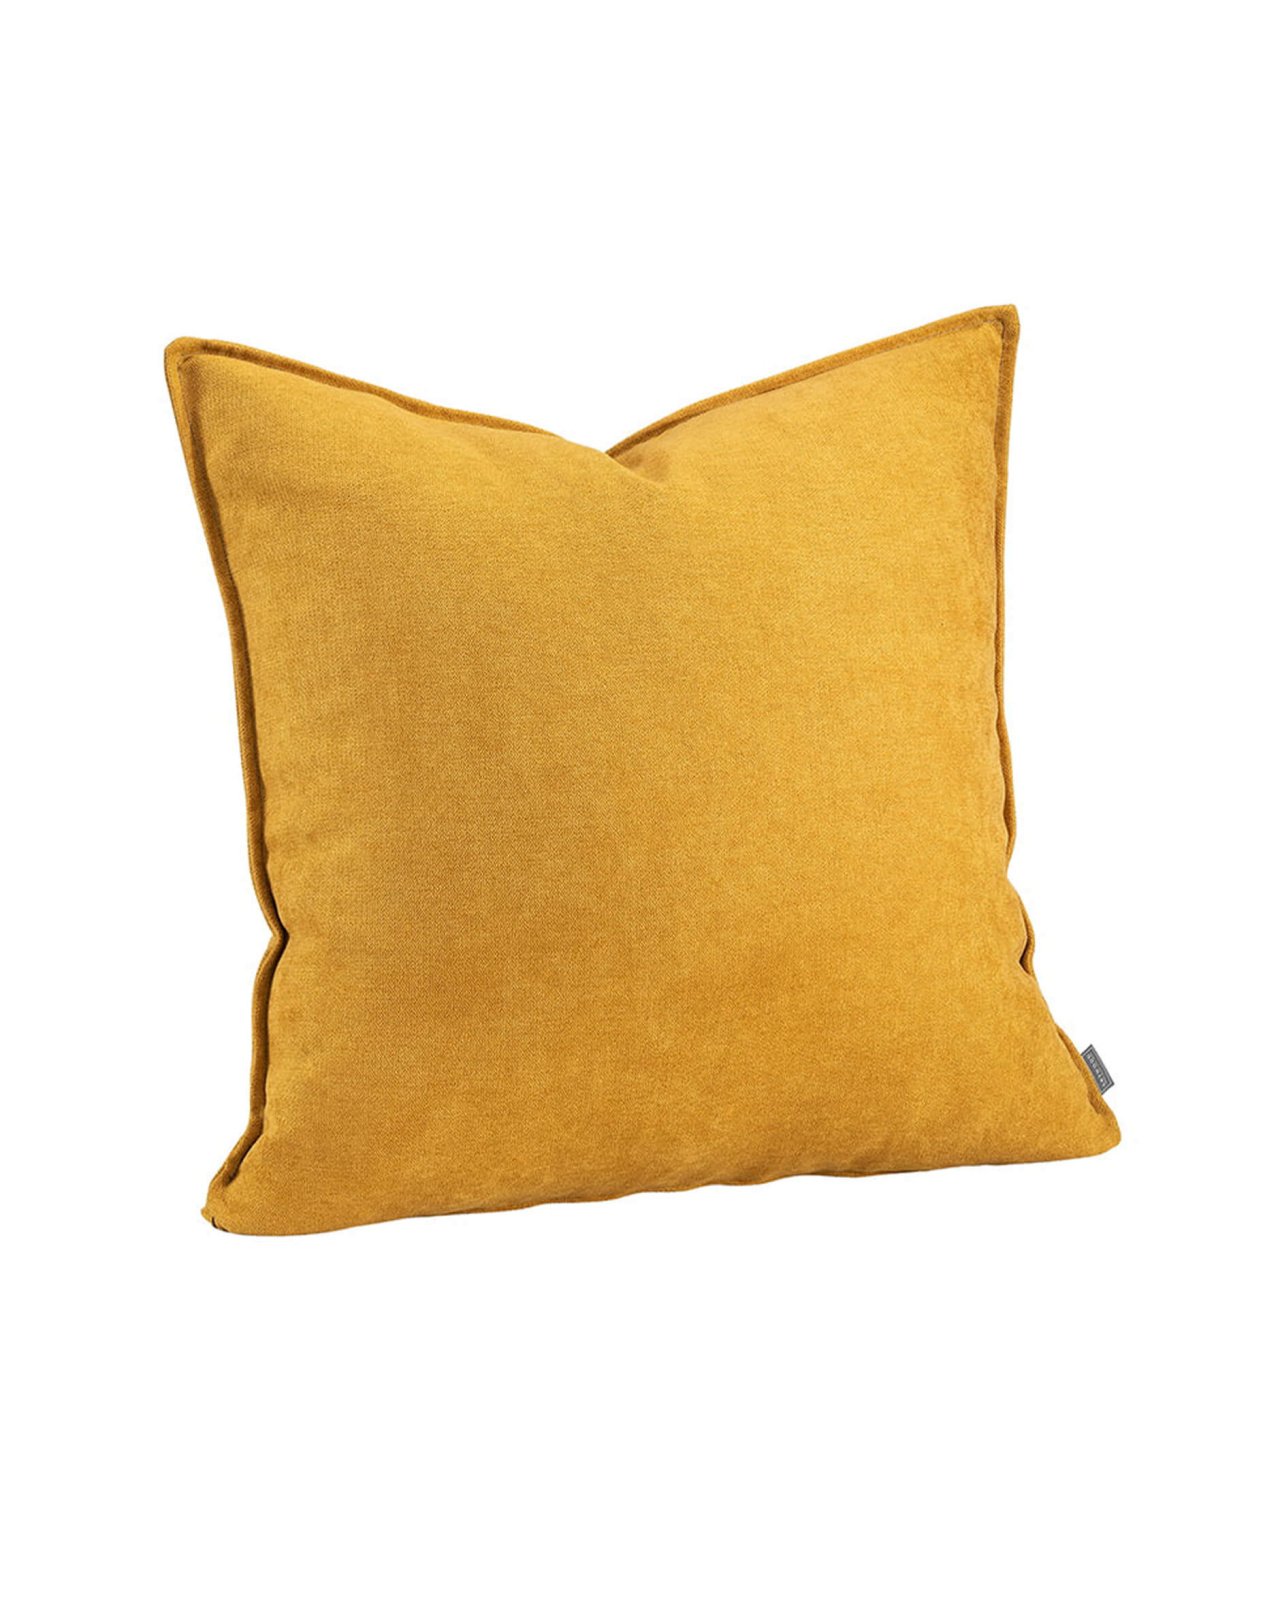 Simply Cushion Cover Mustard